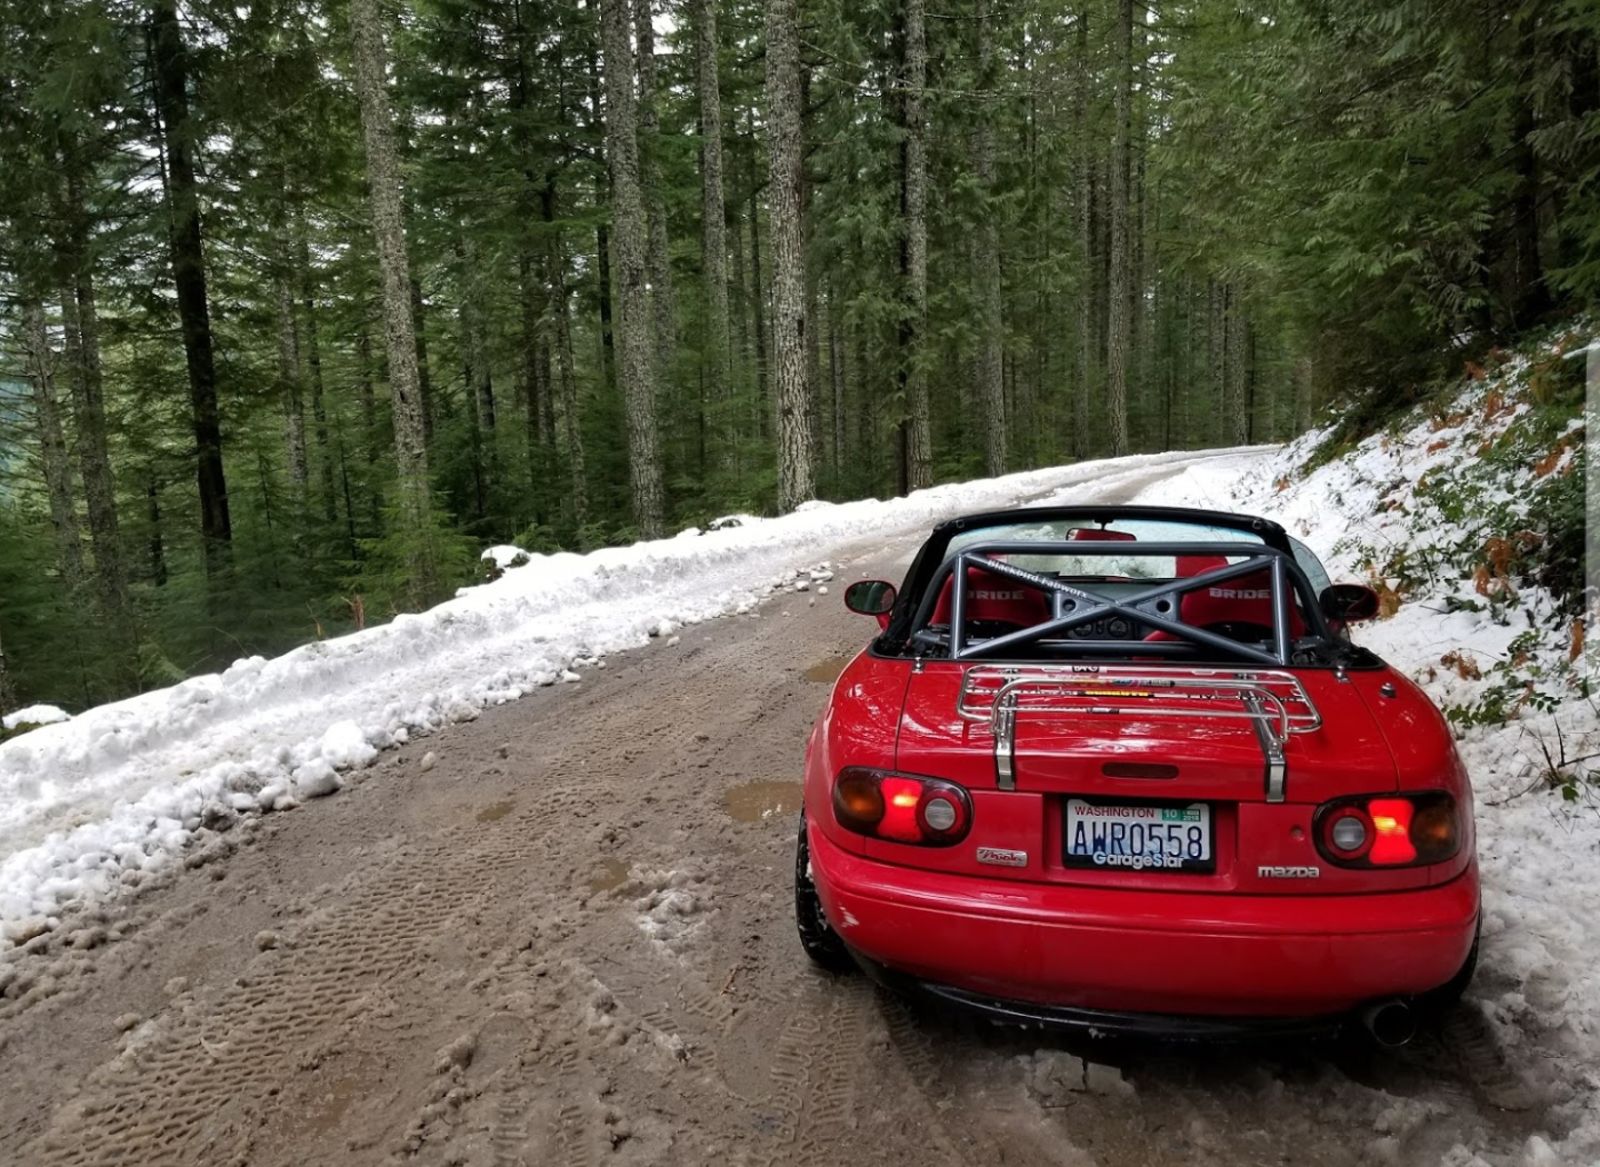 February? Exploring some new roads. This is when I learned that the slushy mud snow stuff is much harder to drive on than powder or crust